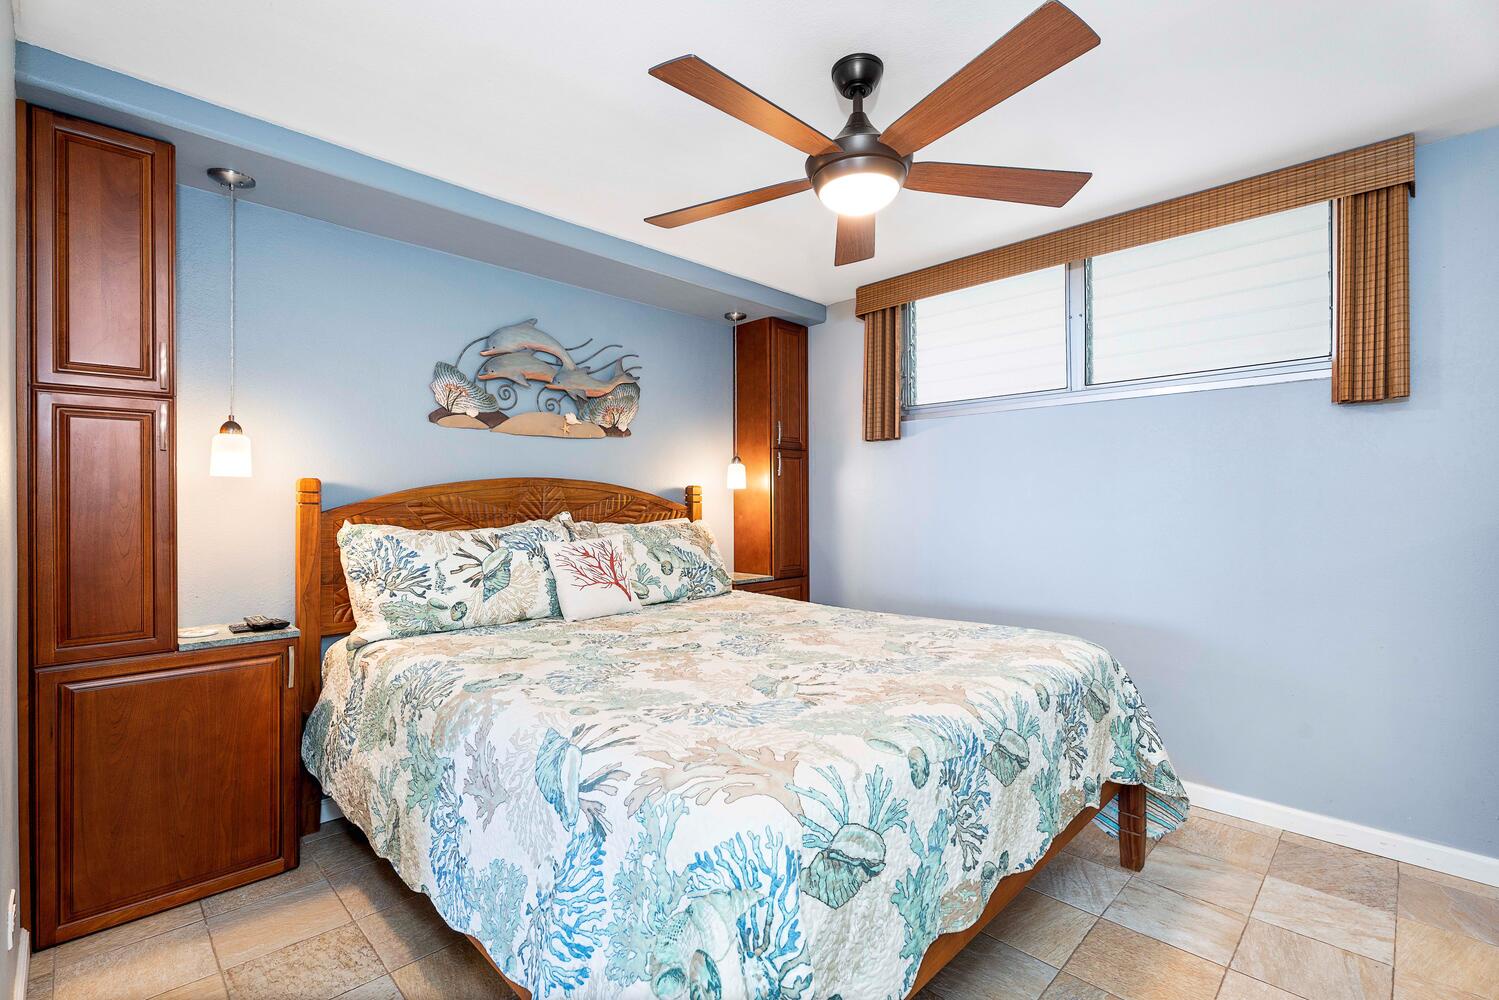 Kailua Kona Vacation Rentals, Kona Alii 403 - The primary bedroom with a king-sized bed, split AC and ceiling fan.